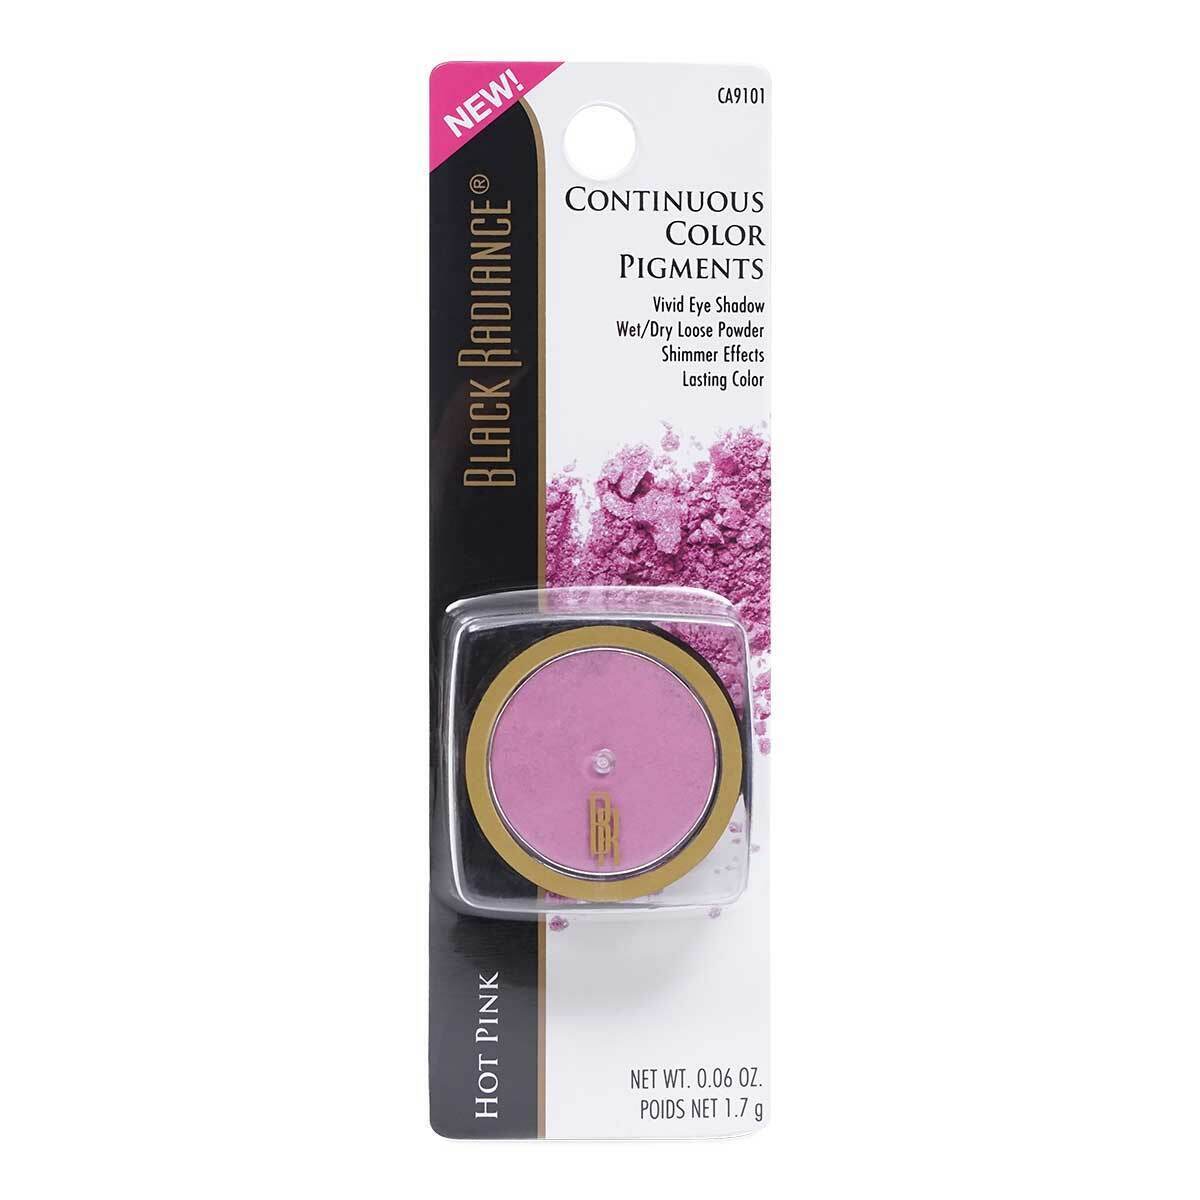 Black Radiance Continuous Color Pigments Eye Shadow "Hot Pink"  BRAND NEW SEALED - $8.59